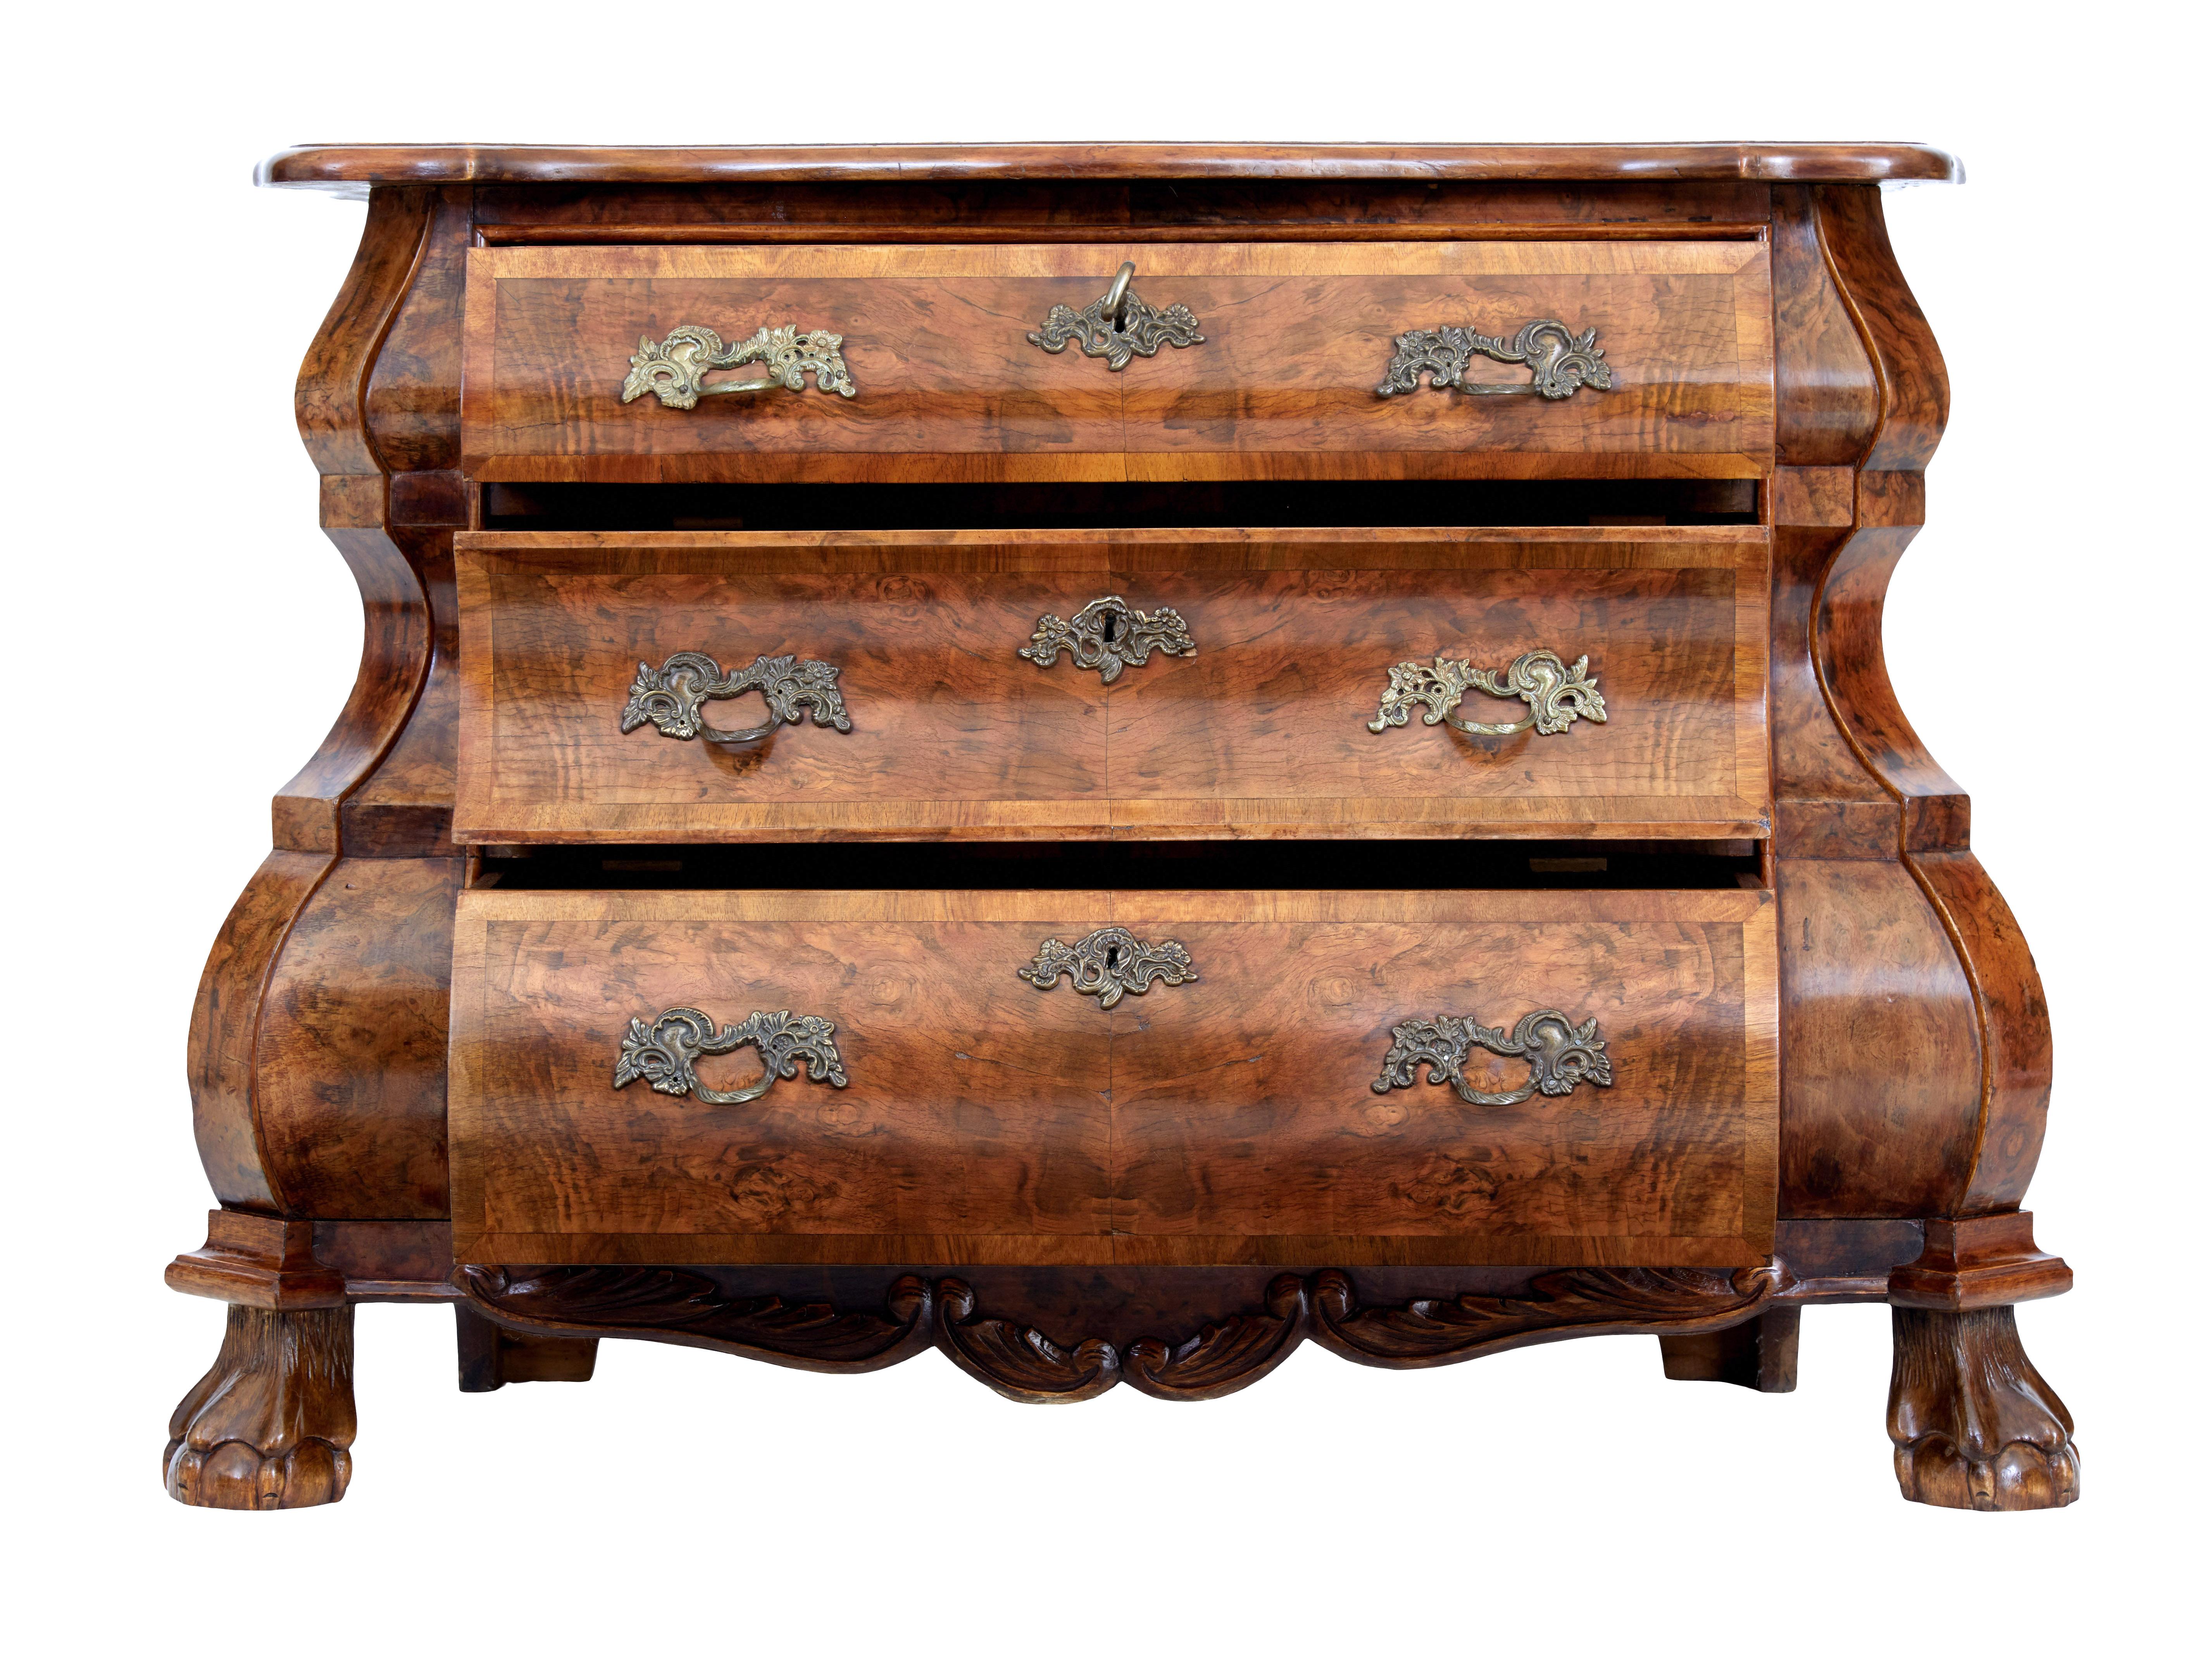 Fine quality dutch walnut shaped commode circa 1900.

Beautiful quality walnut veneers used on this well proportioned Dutch chest of drawers. 3 shaped graduating drawers with crossbanded edge, original ornate handles and escutheons. Carved